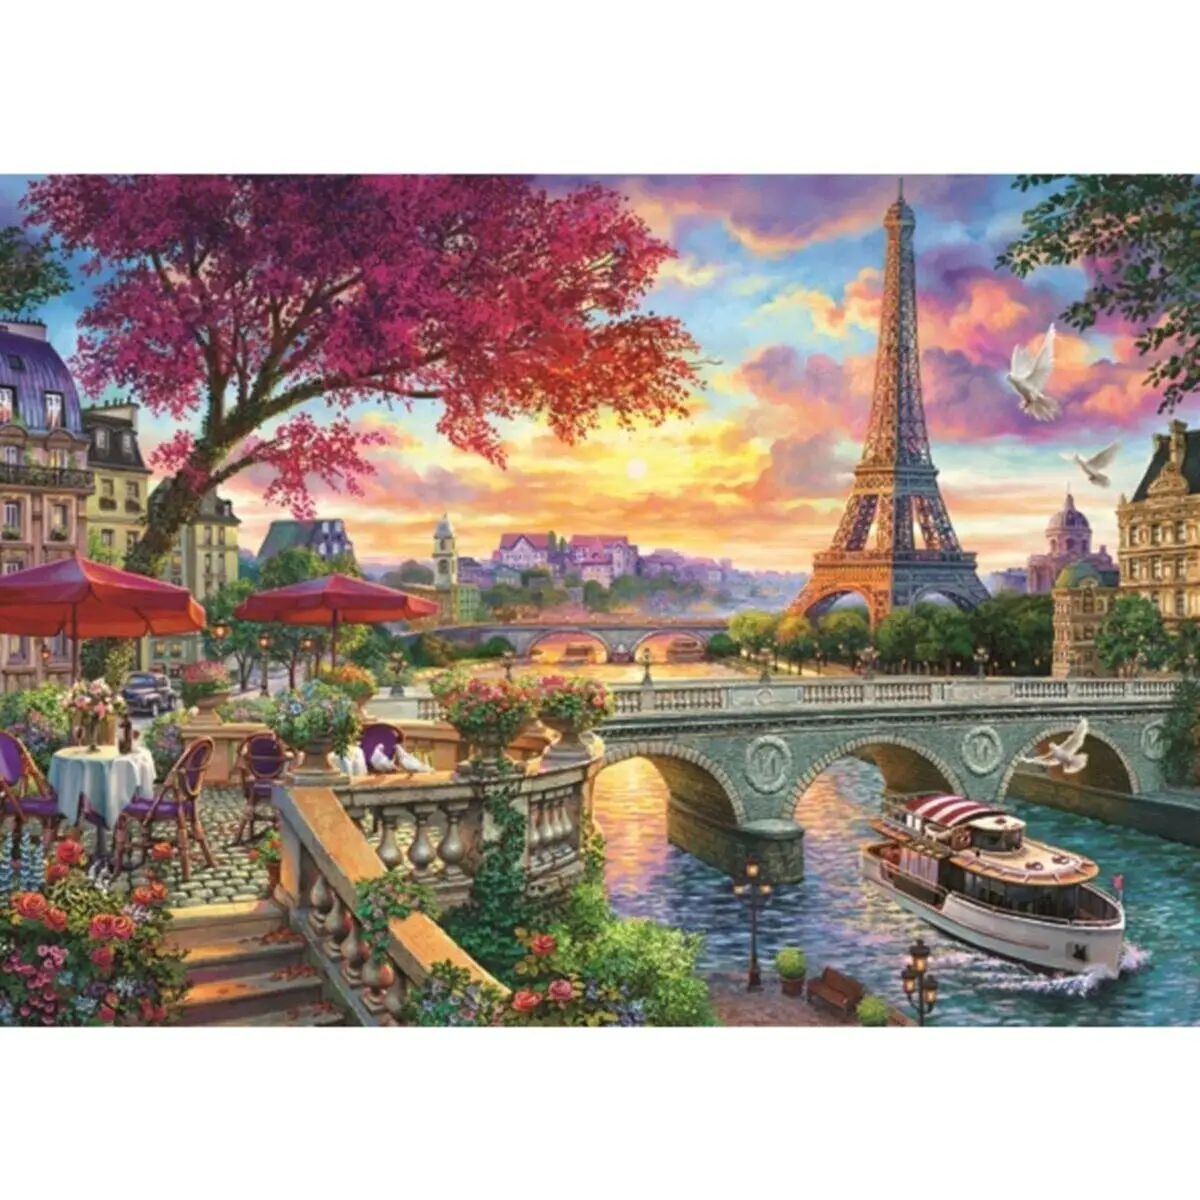 

1 Quality Spring in Paris 3000 Piece Jigsaw Puzzle 120x85 CM Vivid Color Anatolian Fun Creative Relaxing Home Room Wall Design